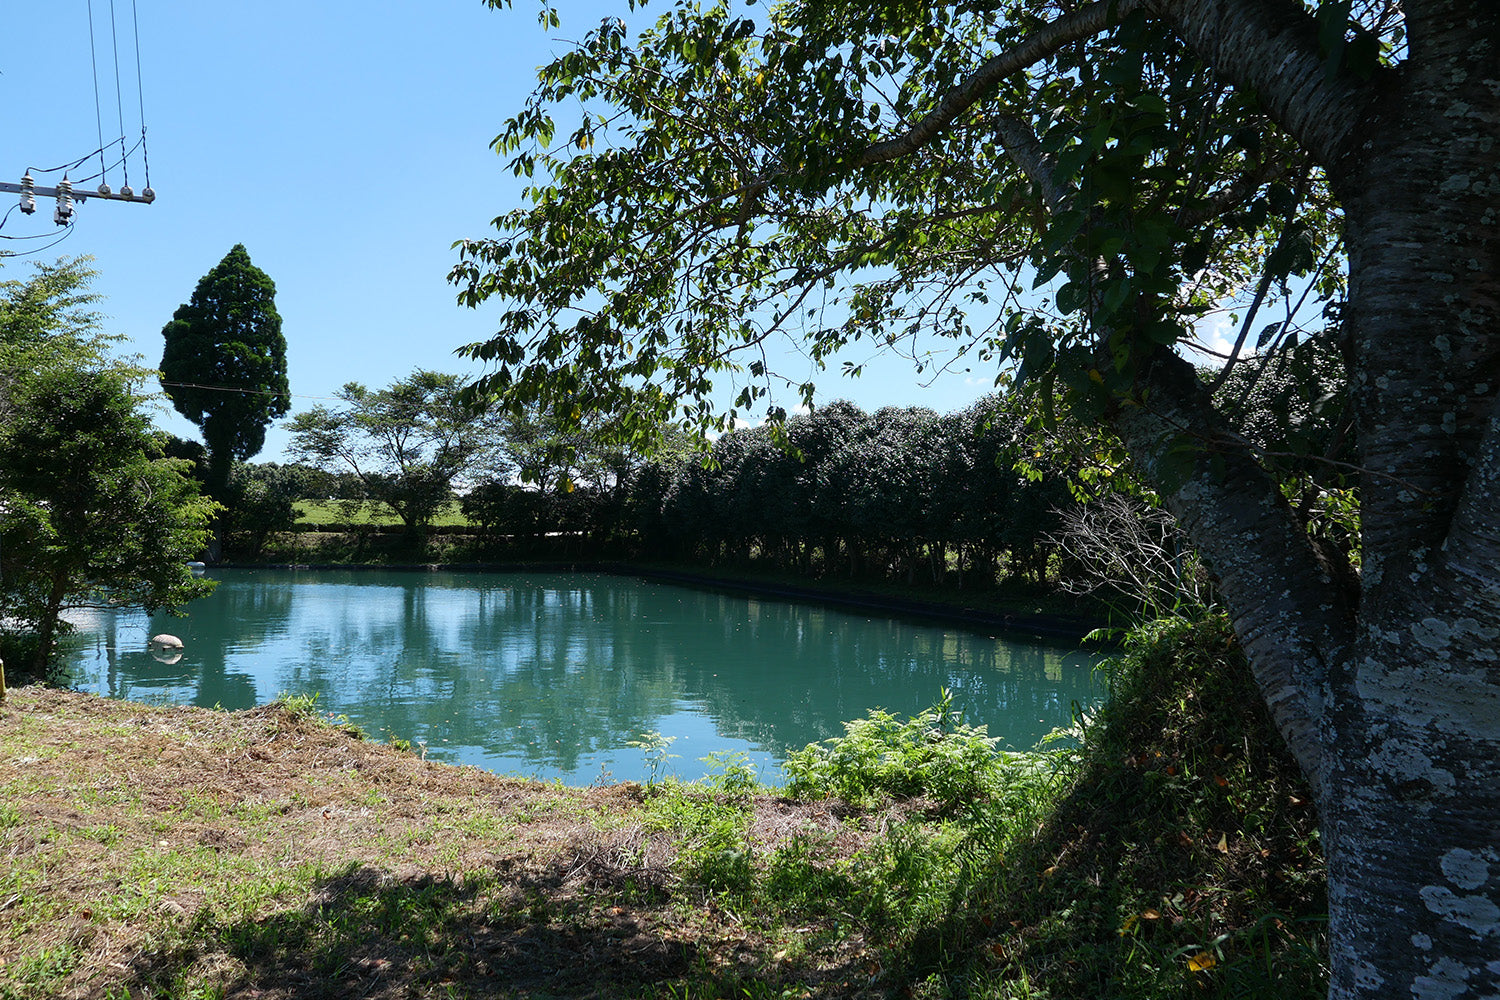 A bright blue reservoir on the farm is used to irrigate the tea plants.